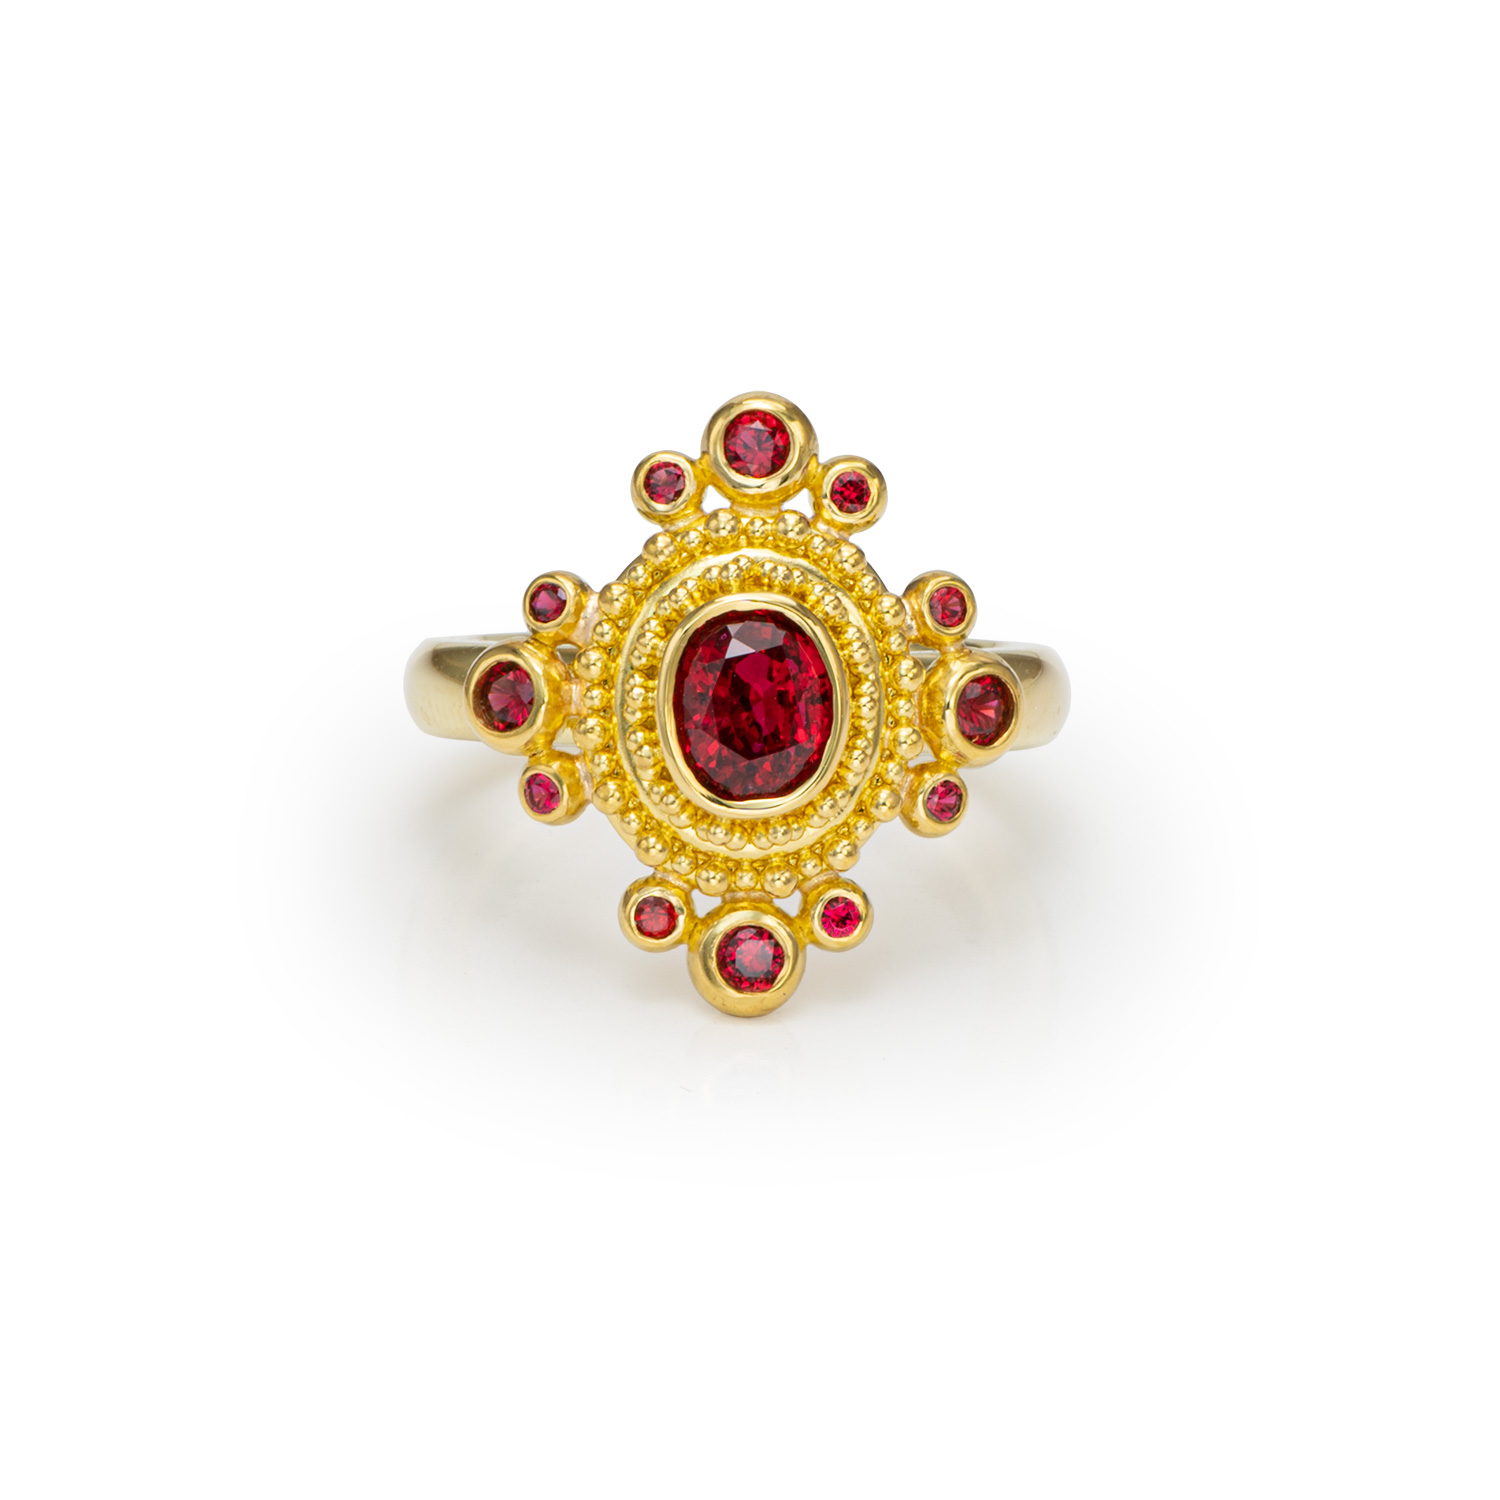 granulation 22kt gold ring with red spinel